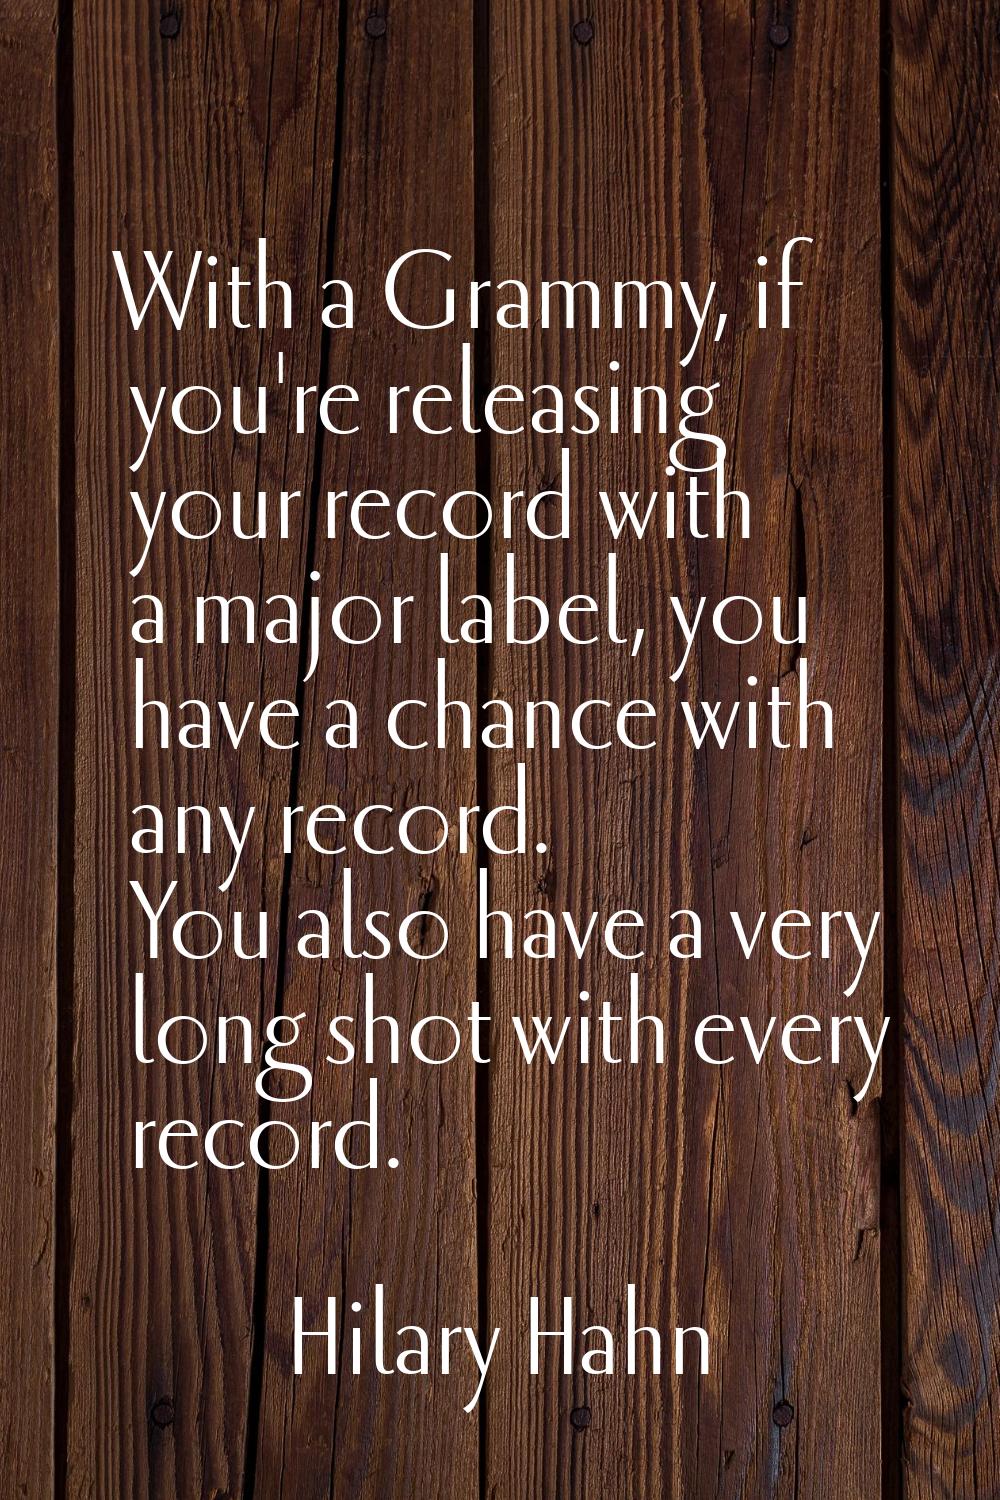 With a Grammy, if you're releasing your record with a major label, you have a chance with any recor